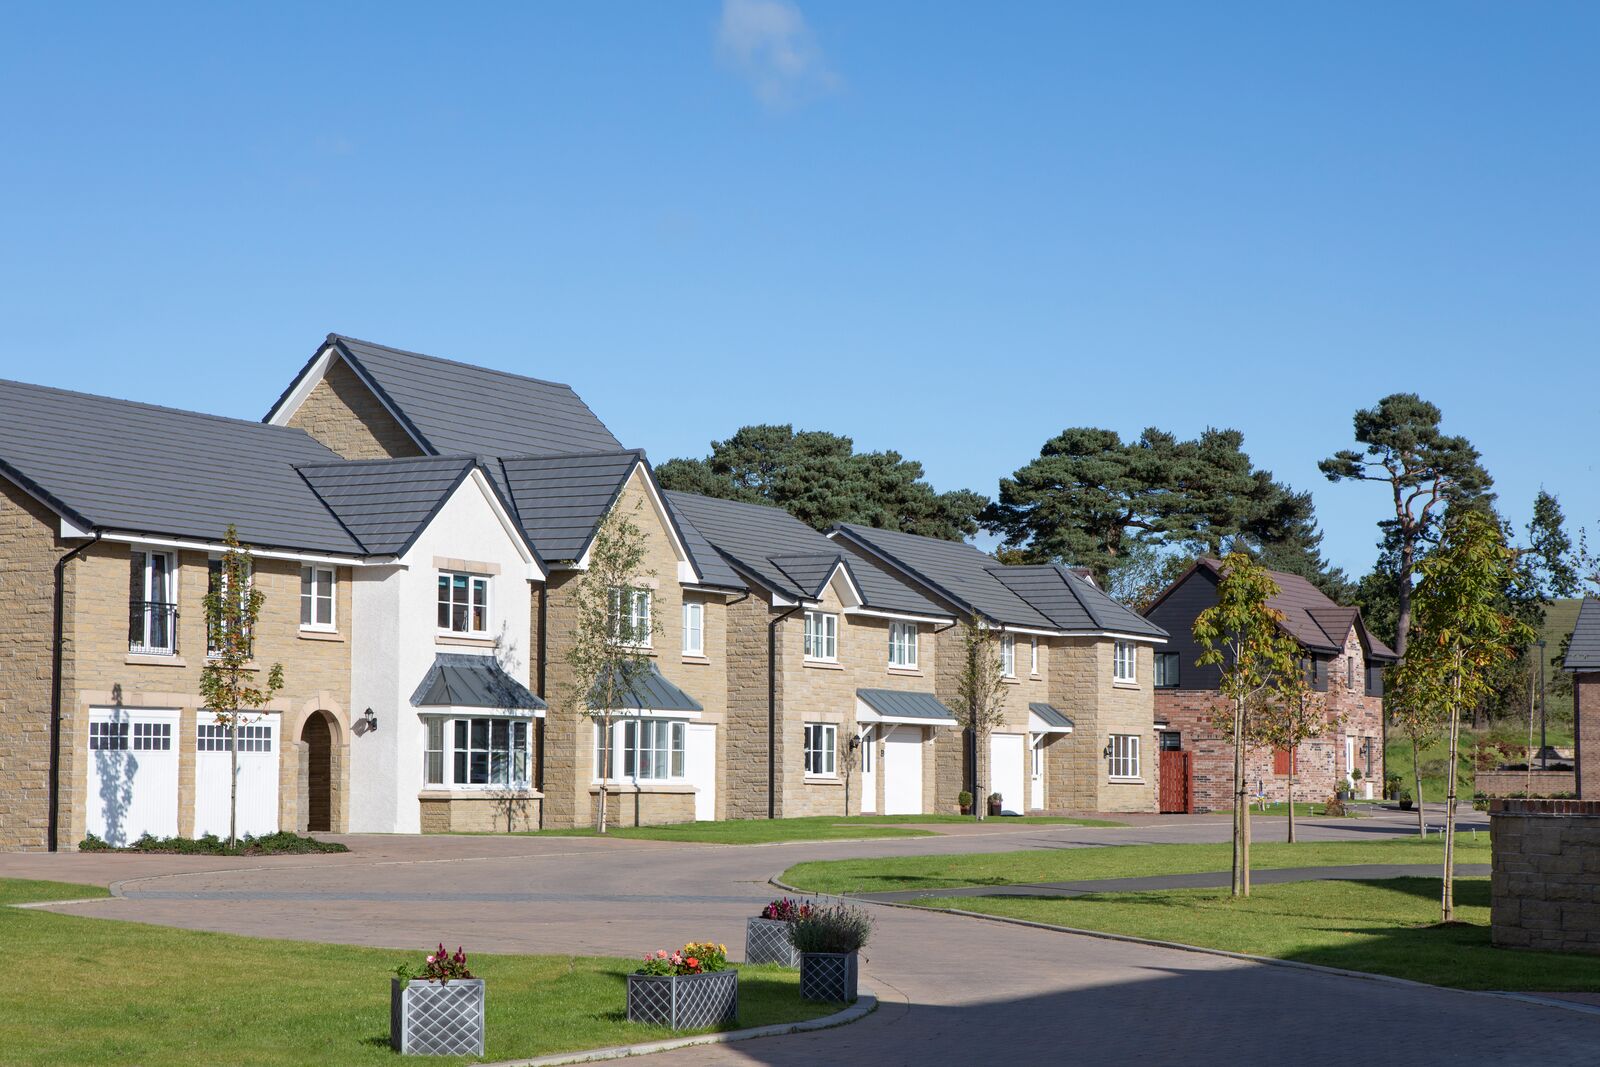 Stewart Milne Homes to expand Bishopton development by 197 new properties